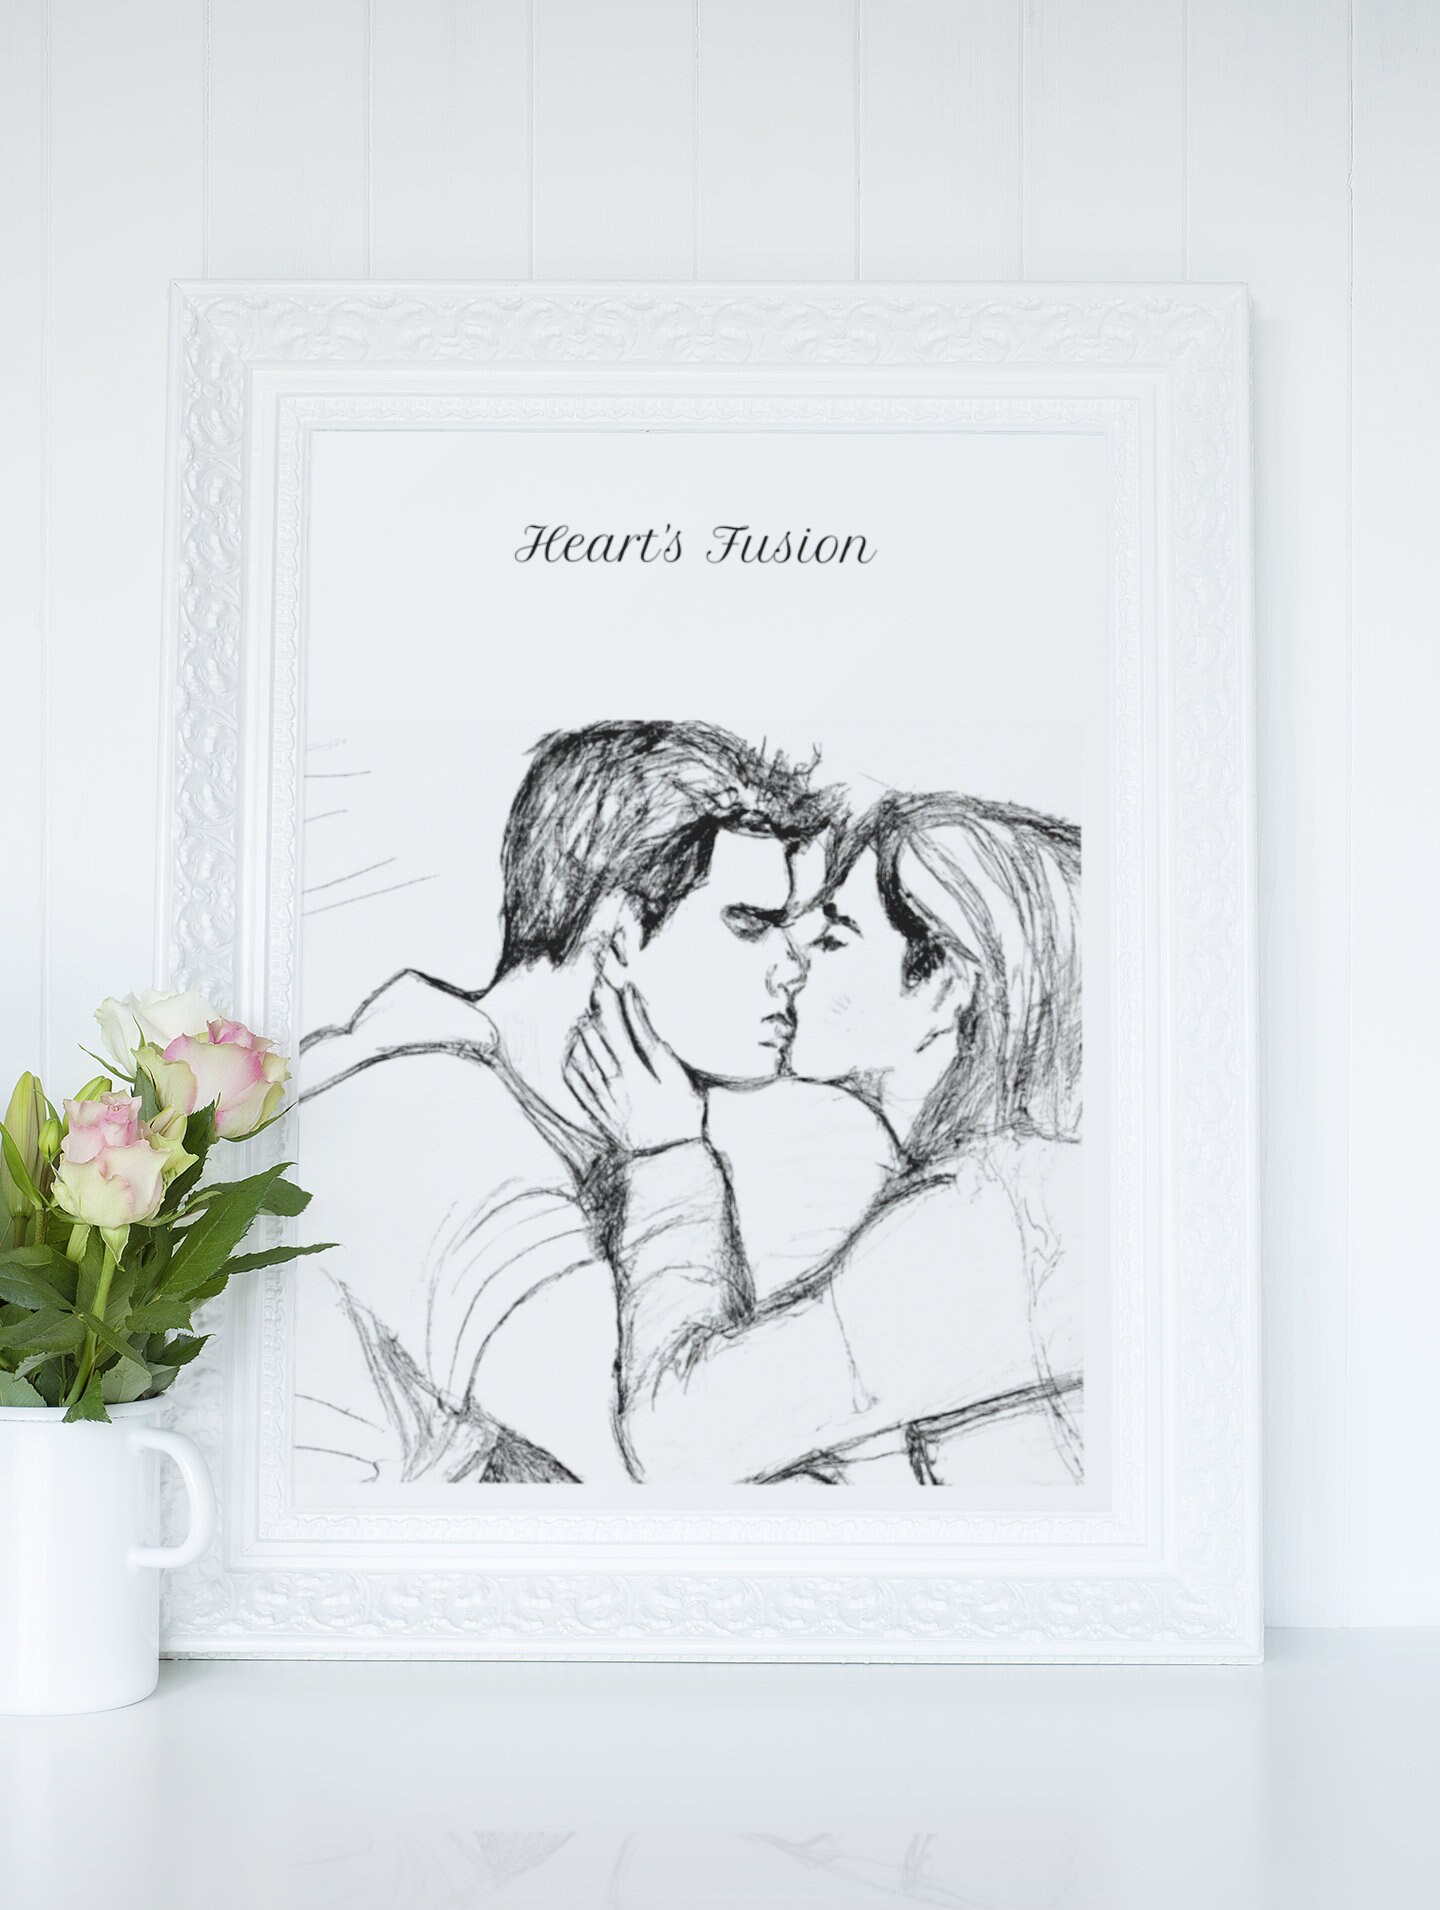 Romantic loving couples💕💕 - Abhi new awesome pen sketch store - Drawings  & Illustration, People & Figures, Love & Romance - ArtPal